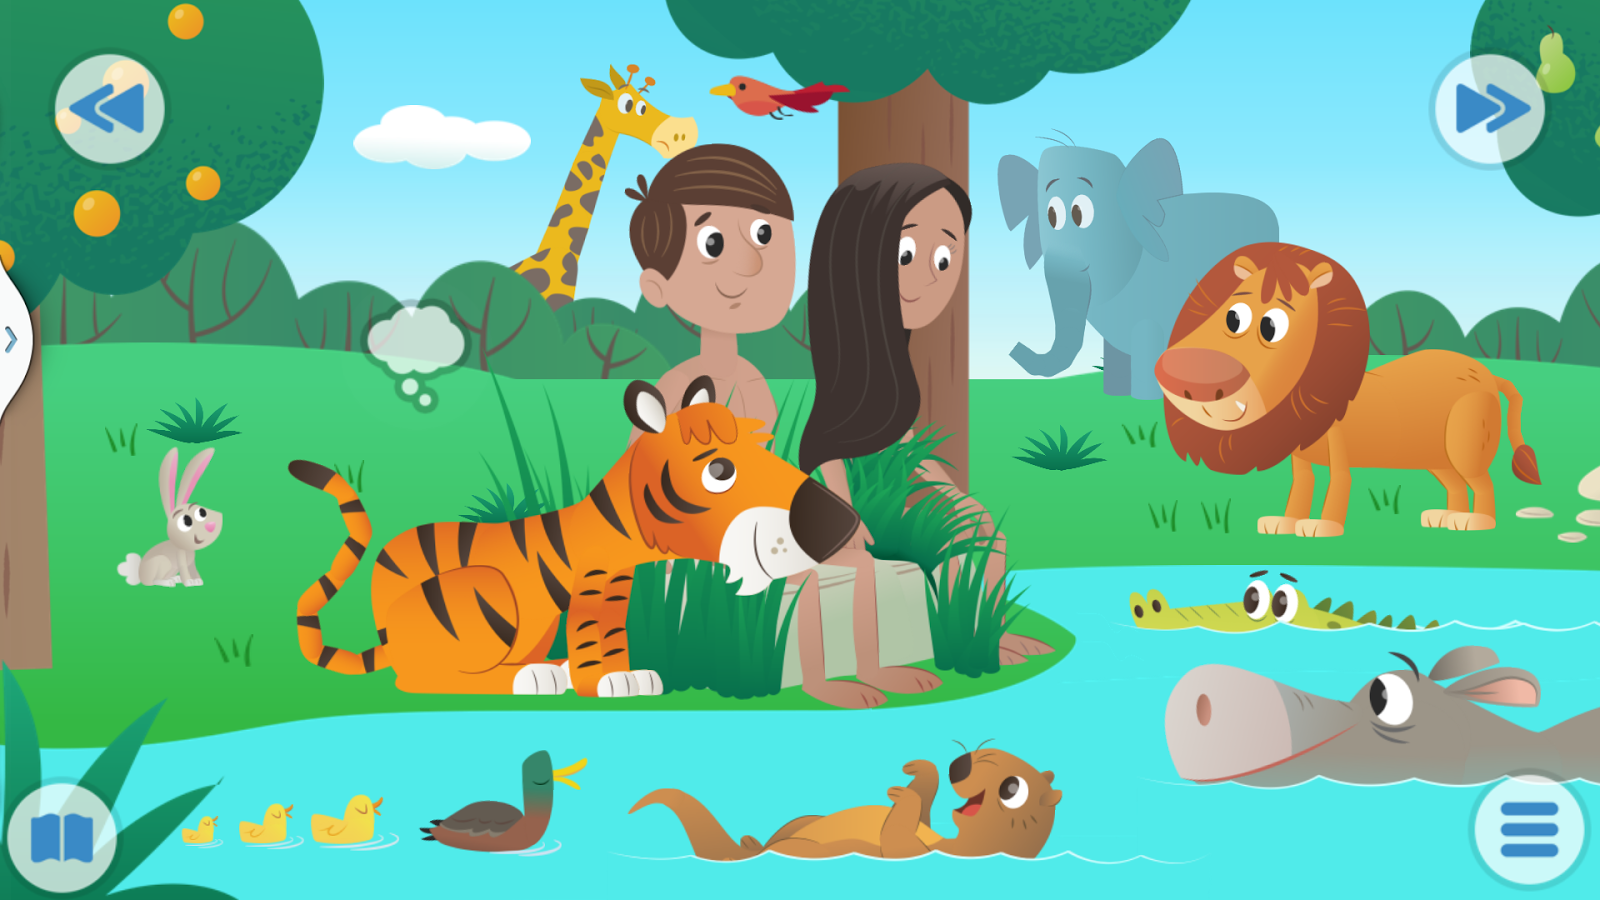 Bible for Kids - Android Apps on Google Play